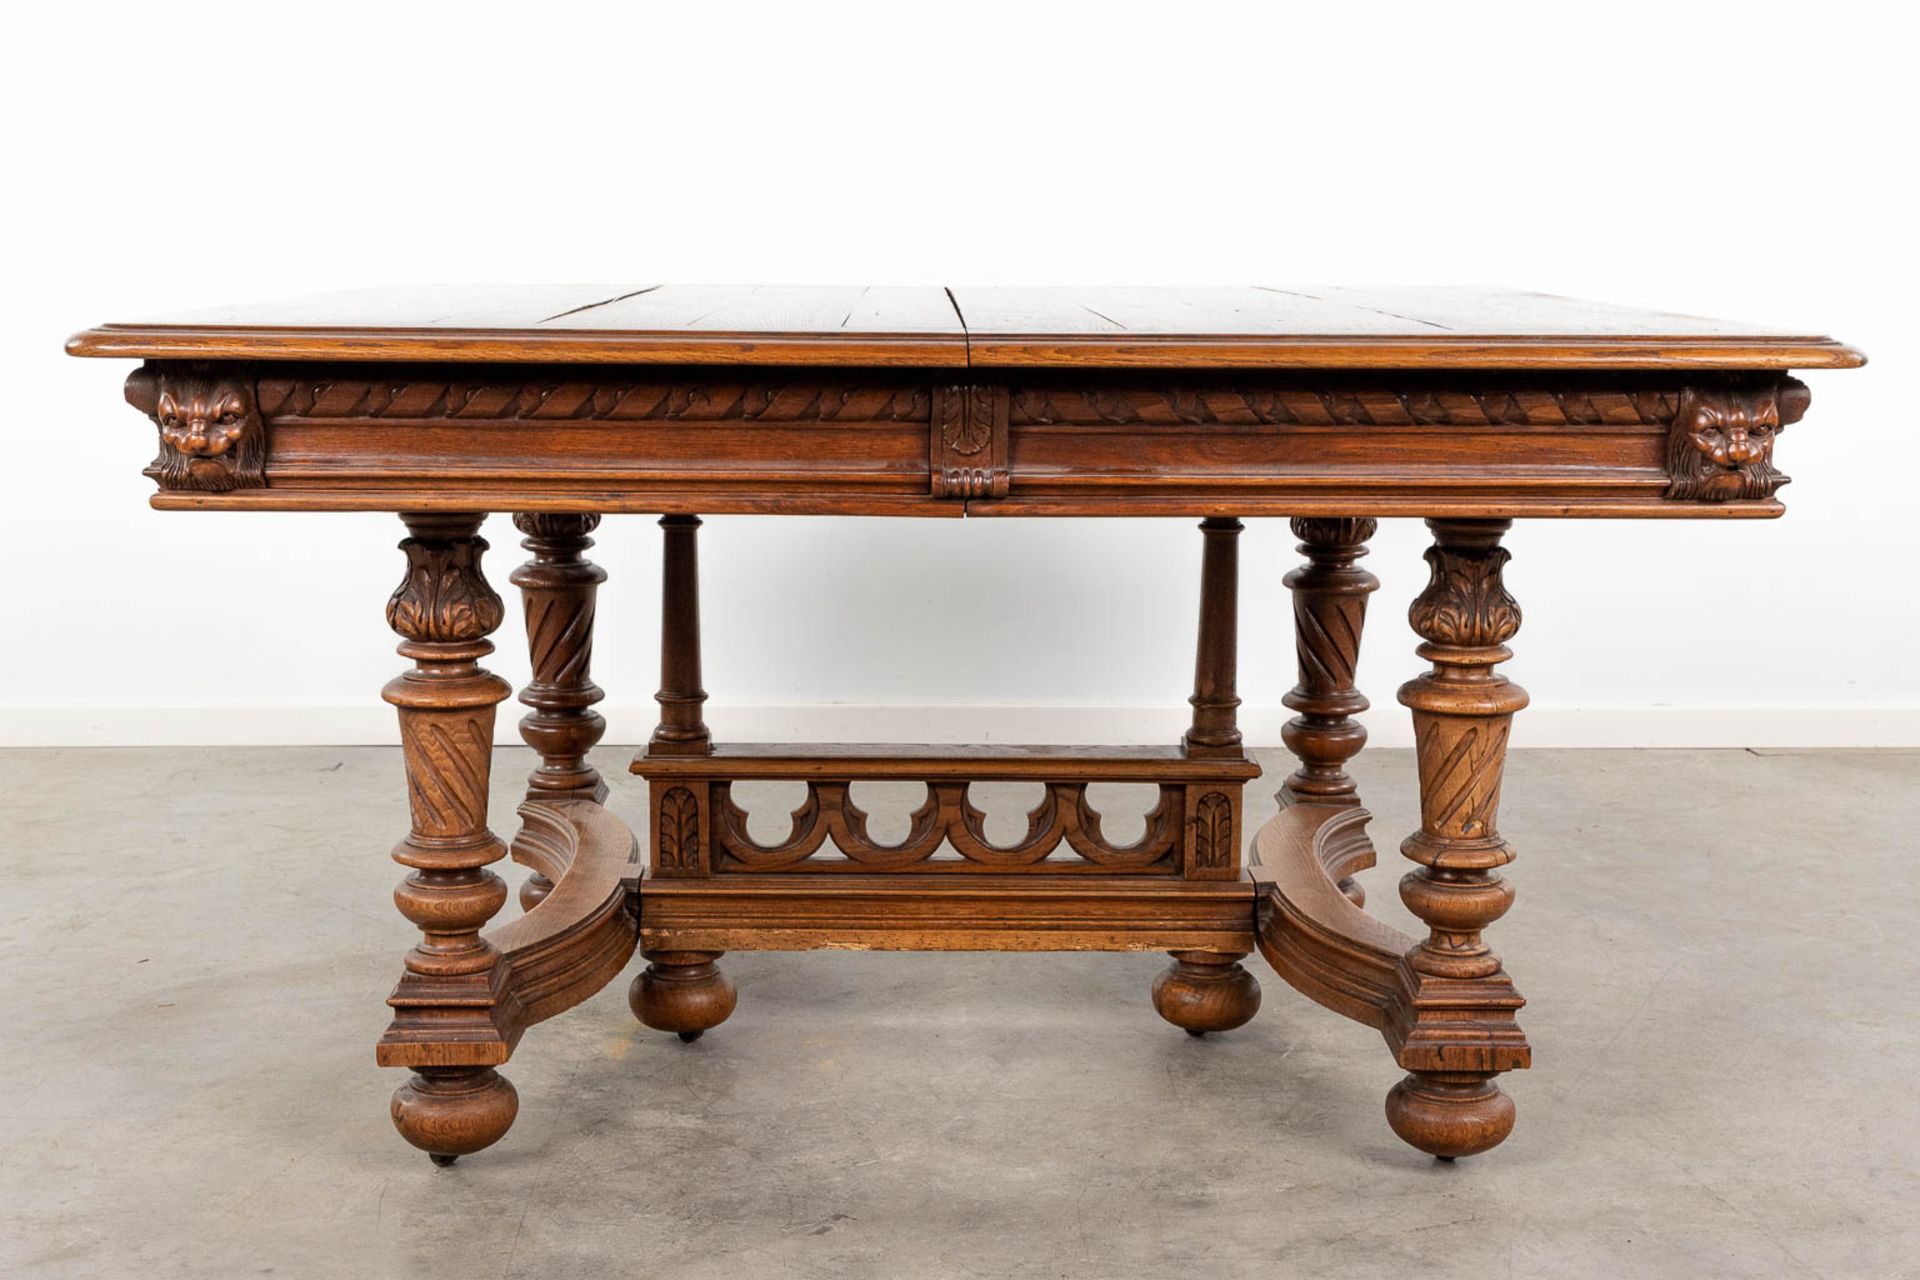 An antique table with 6 chairs in renaissance style. (L:120 x W:142 x H:72 cm) - Image 17 of 24